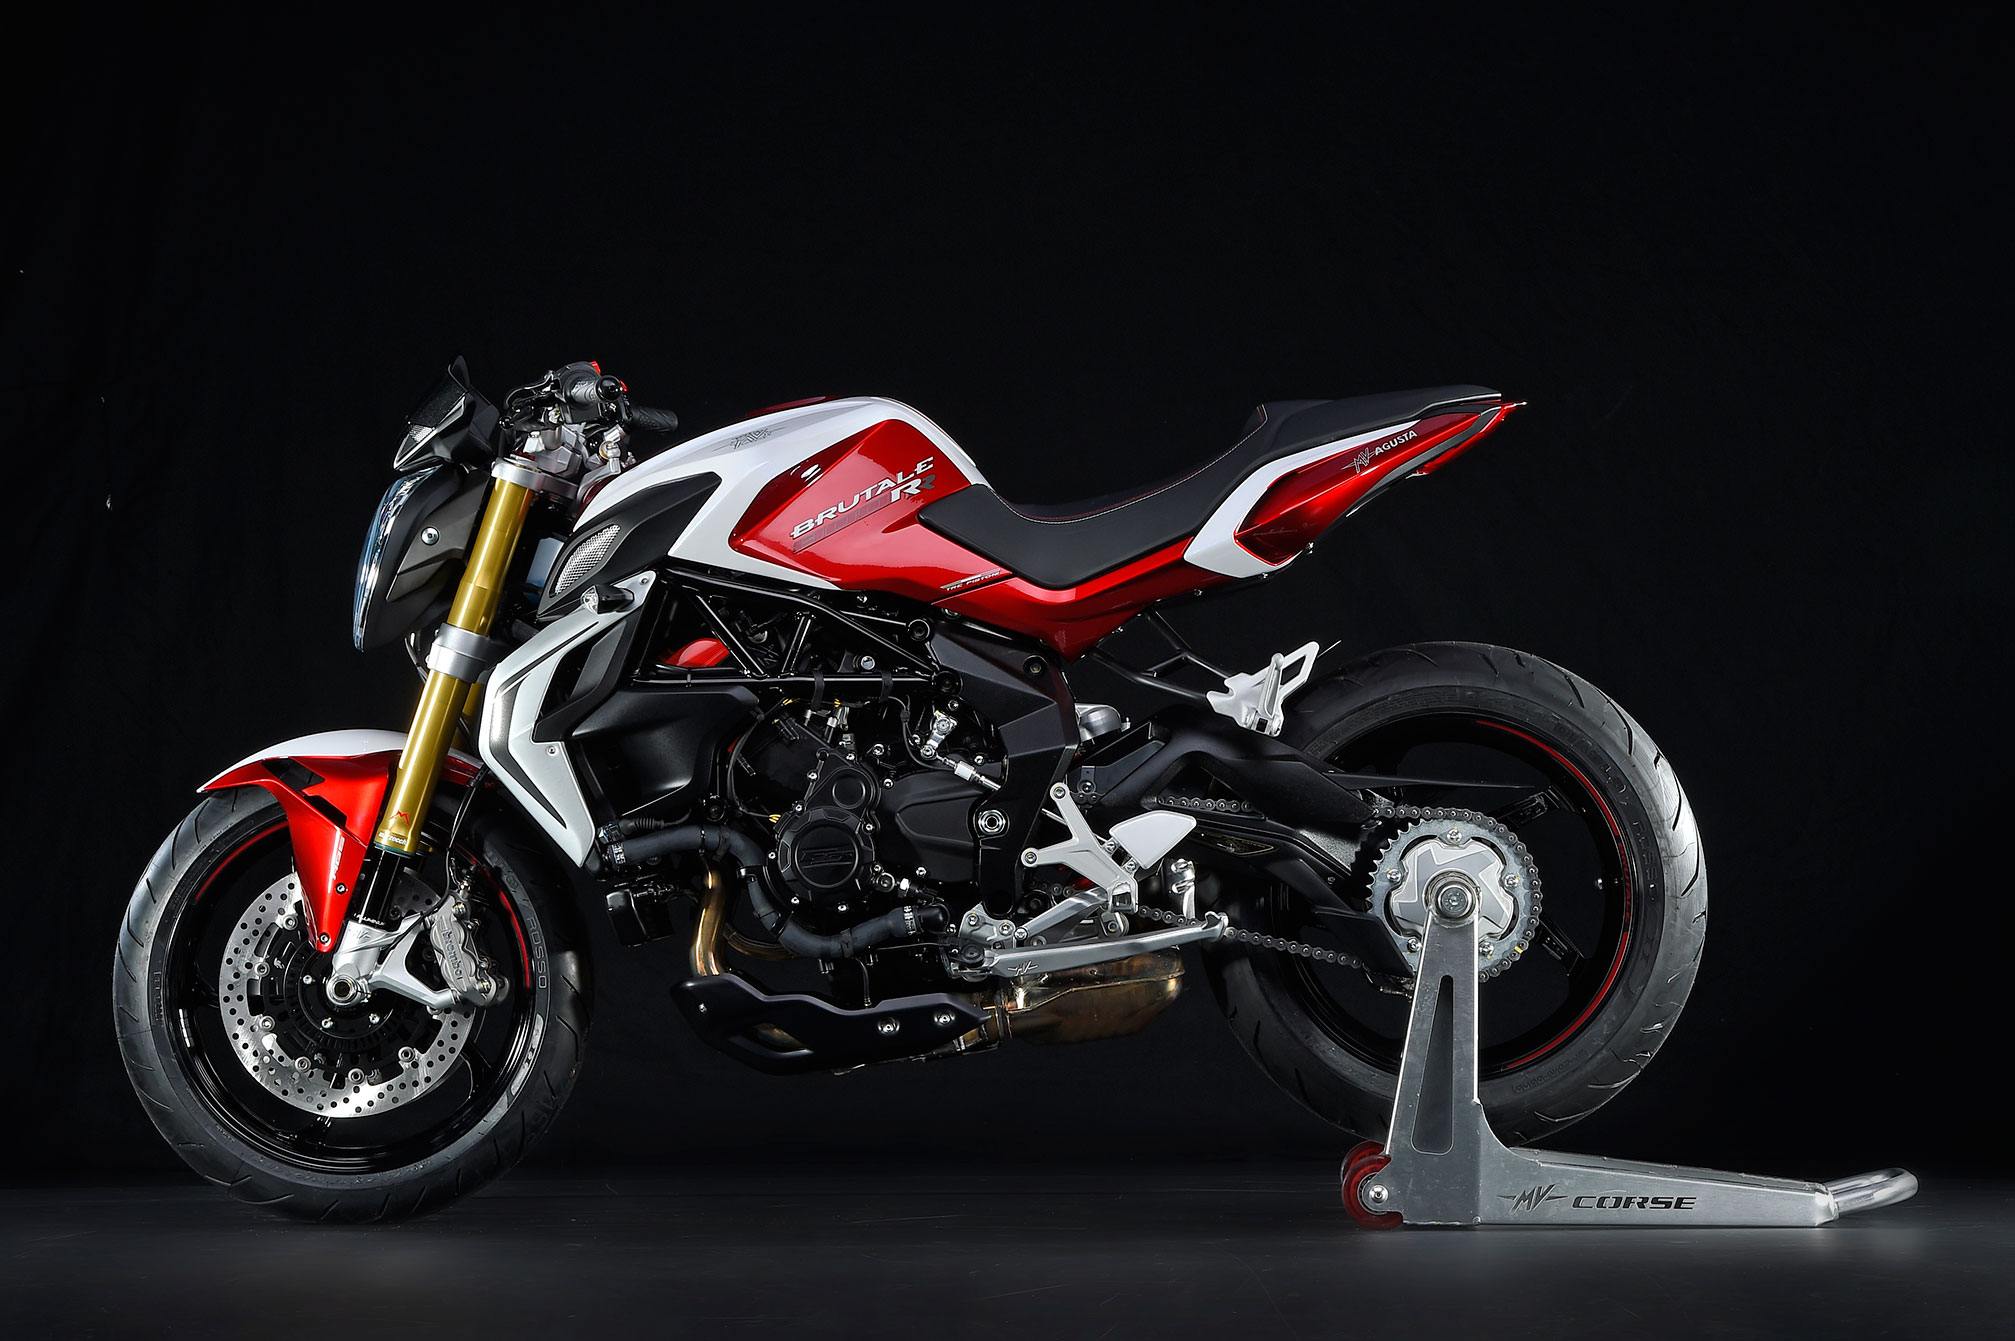 Review: 2016 MV Agusta Brutale 800 - Bike Review